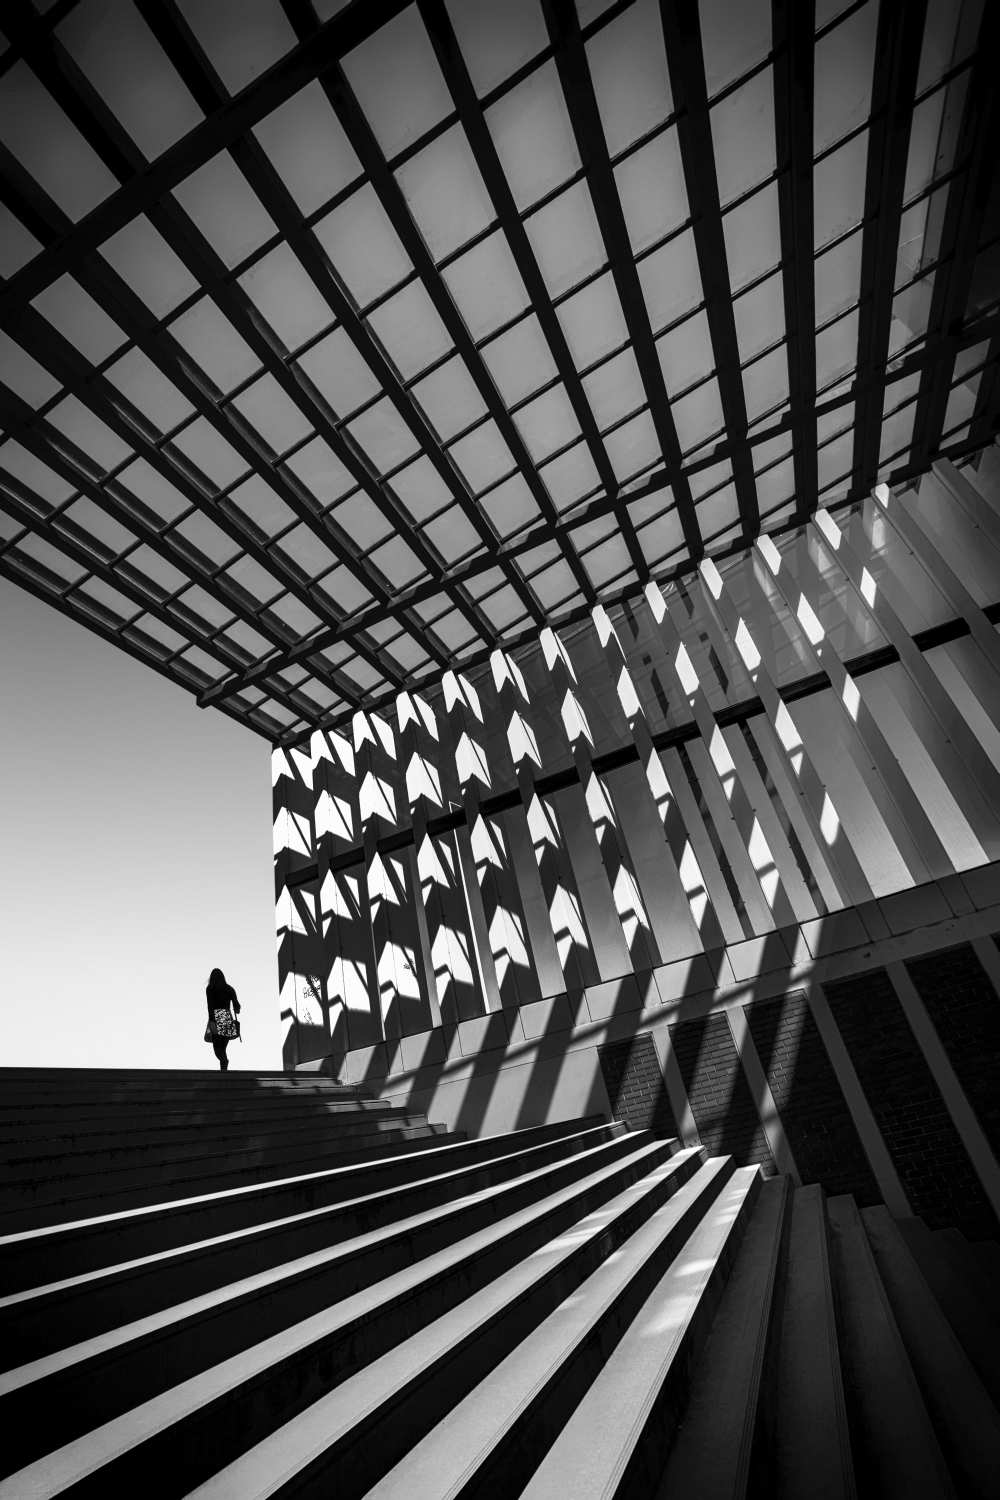 Drifting from Paulo Abrantes